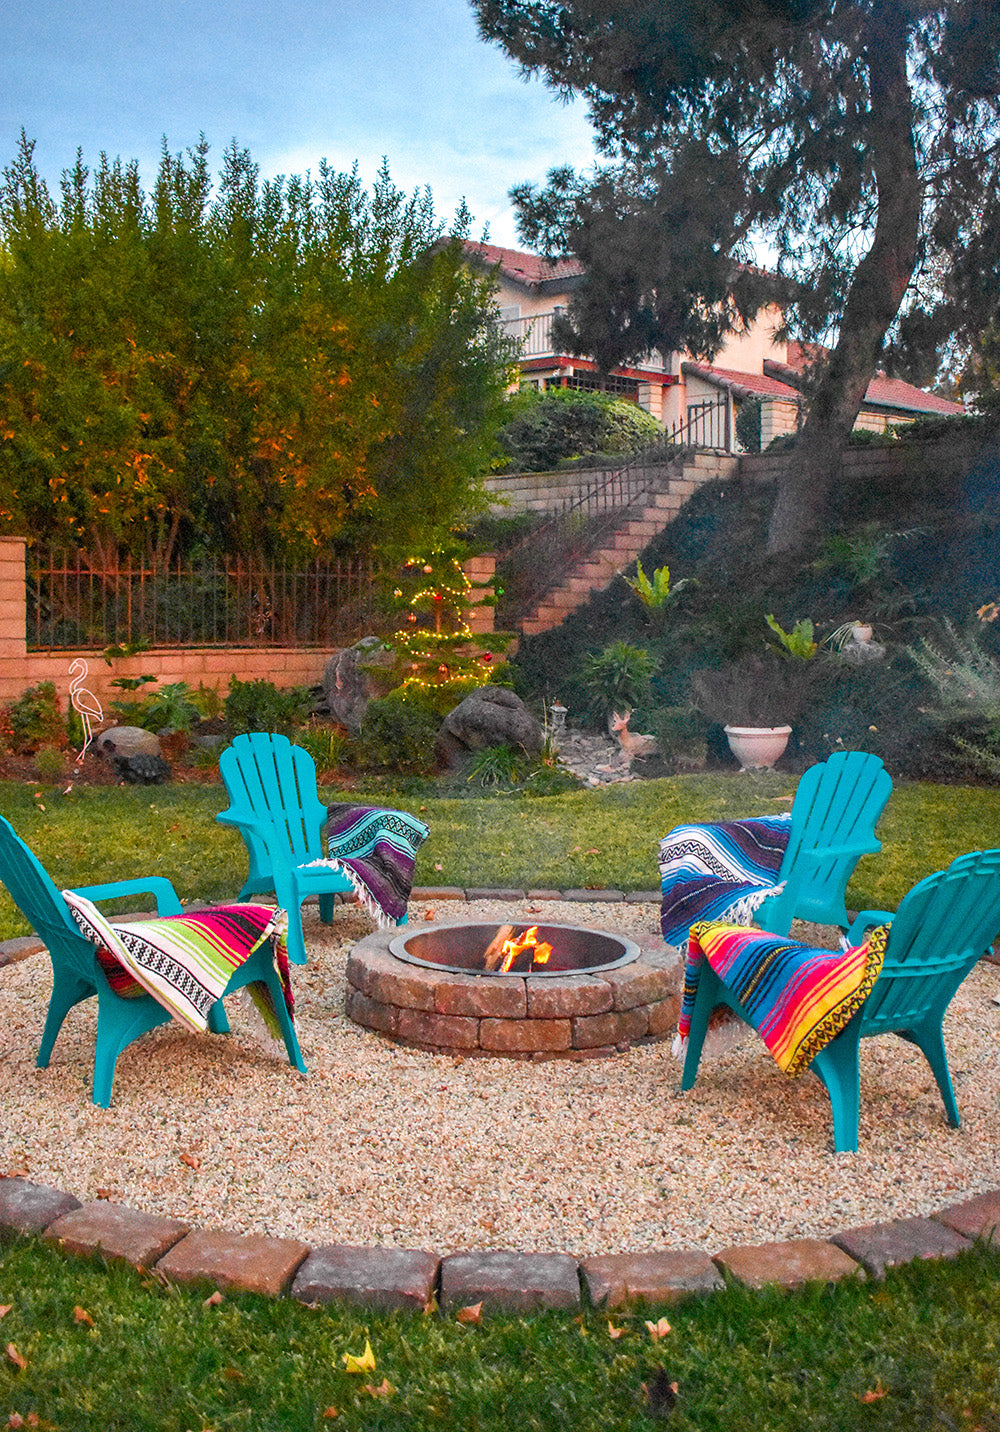 Make Christmas memories with the family around the fire pit this year - Davis Taylor Trading Co.